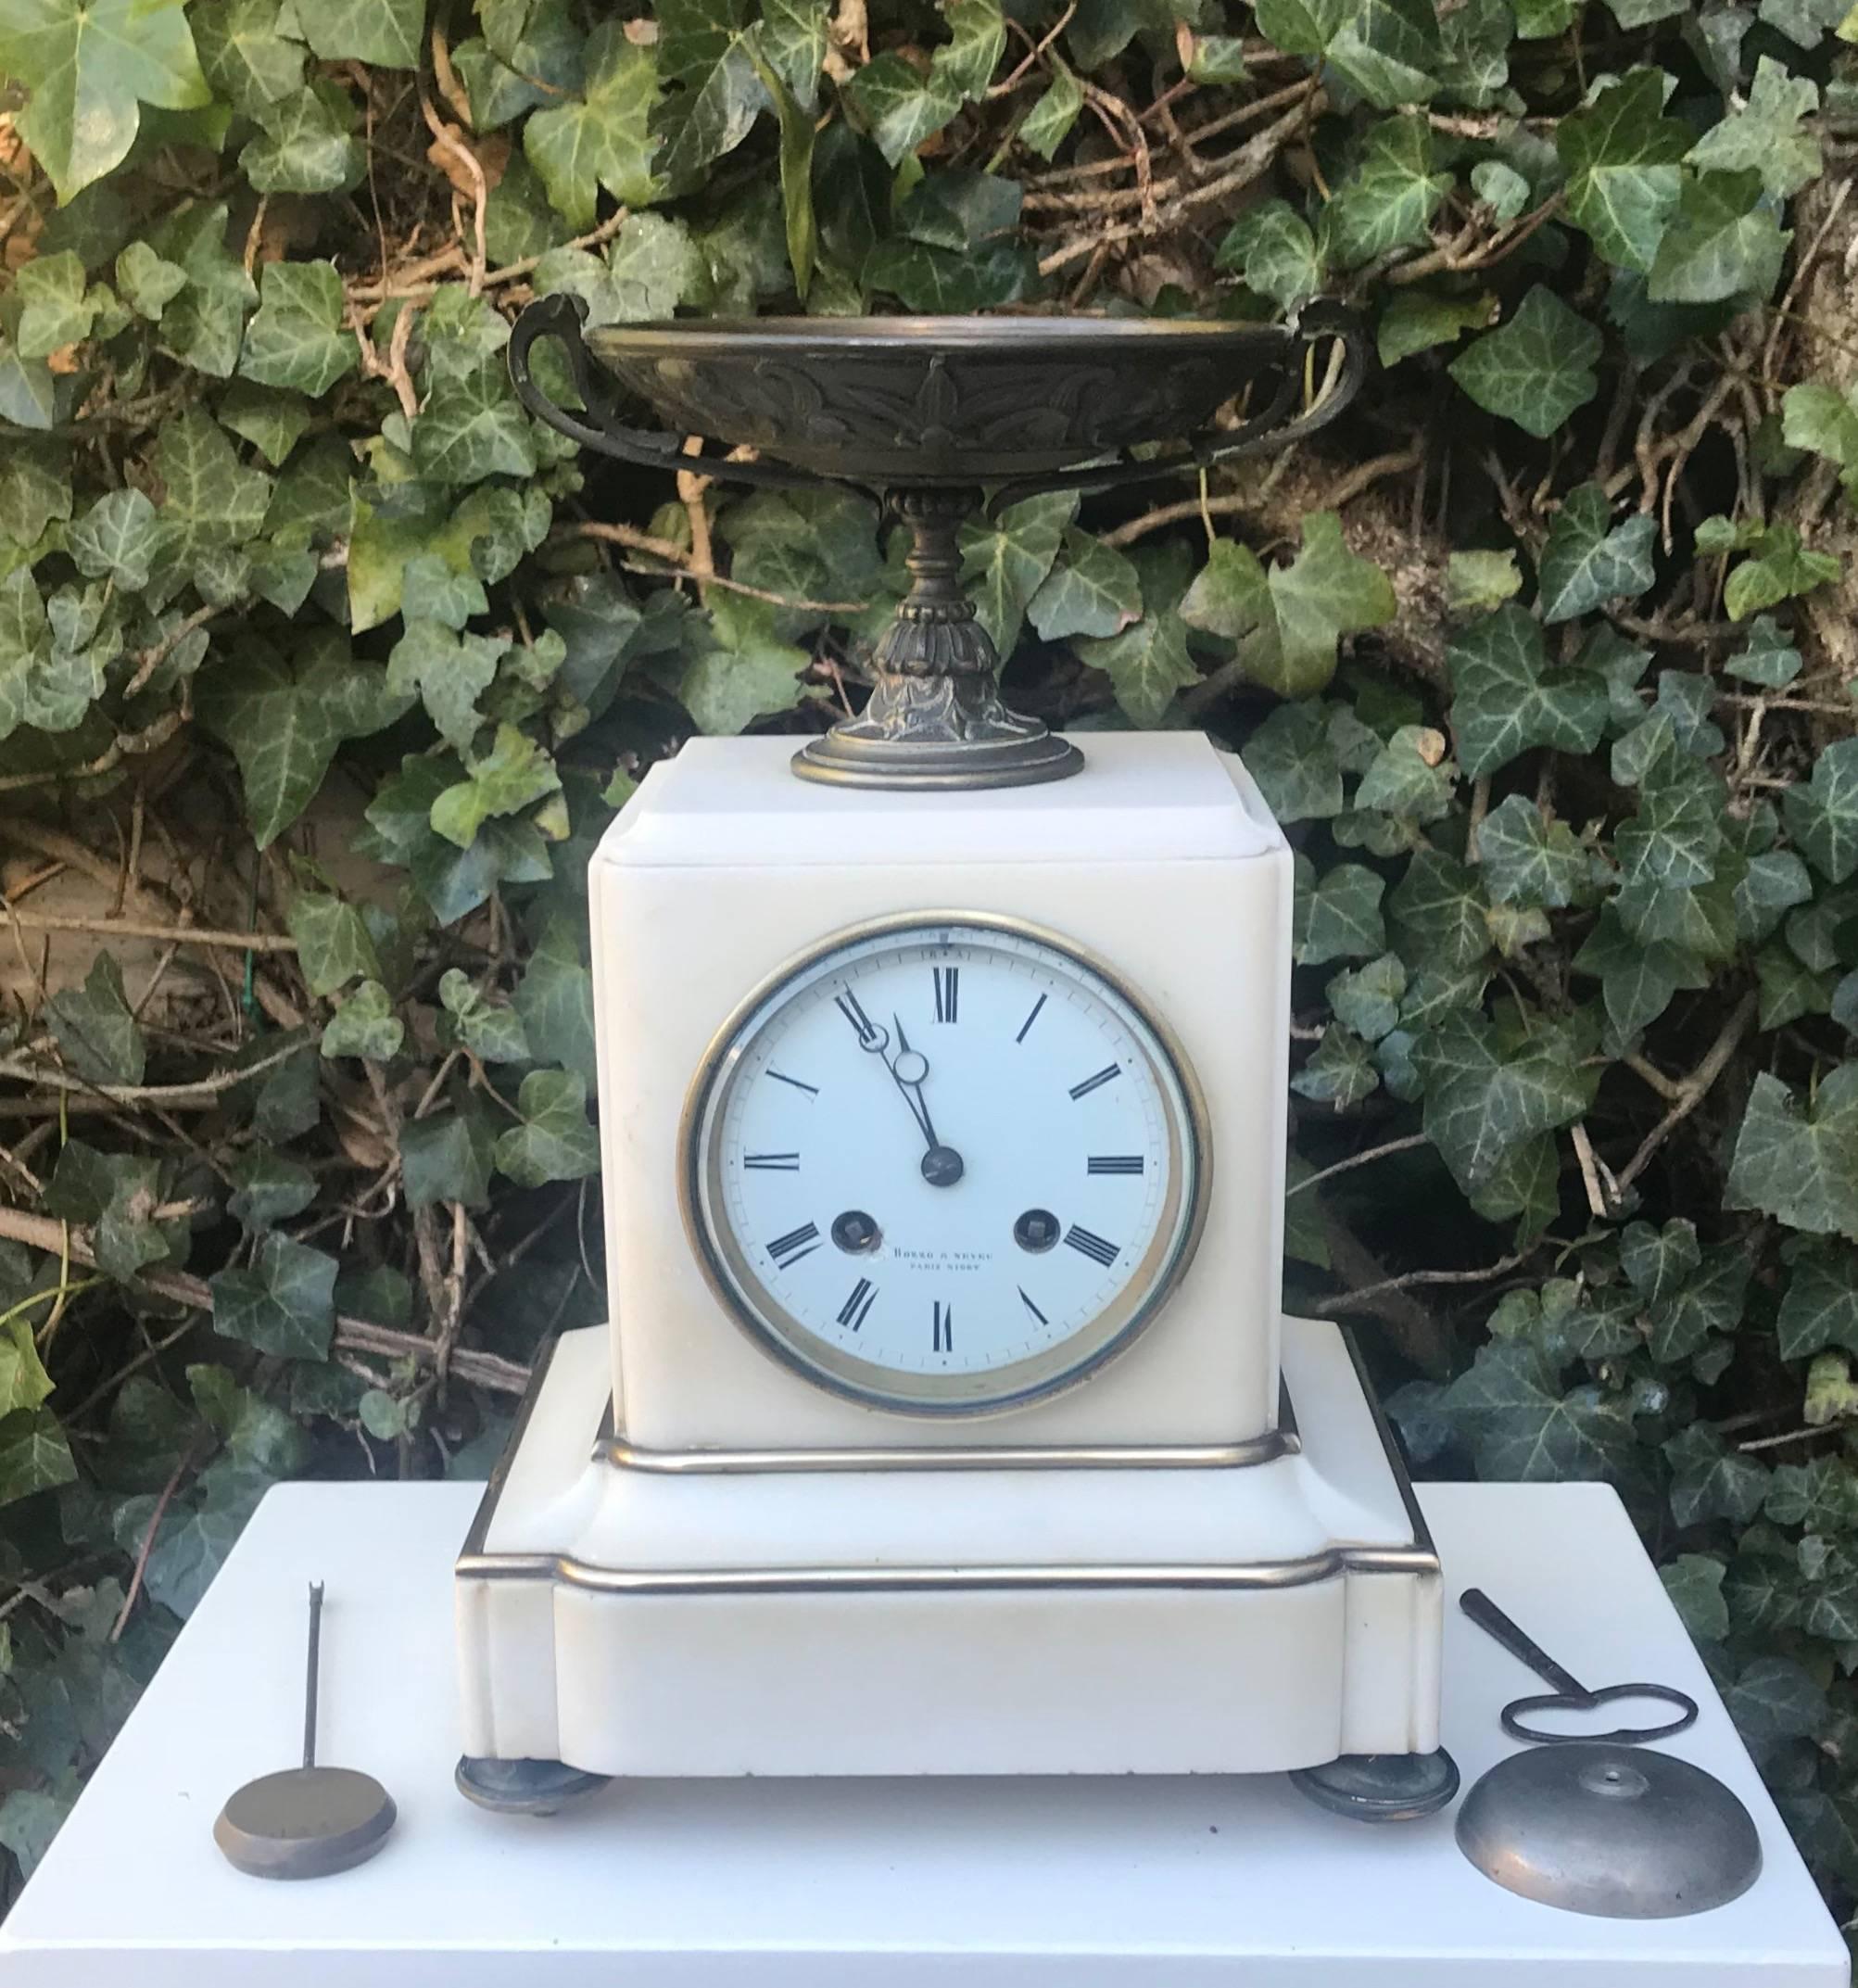 Practical size and beautiful shape, antique mantel clock.

This classical shape, white marble mantel clock comes with subtle details that make it very pleasing to the eye. The brass lining on the outside accentuate the shape and the bronze bowl on